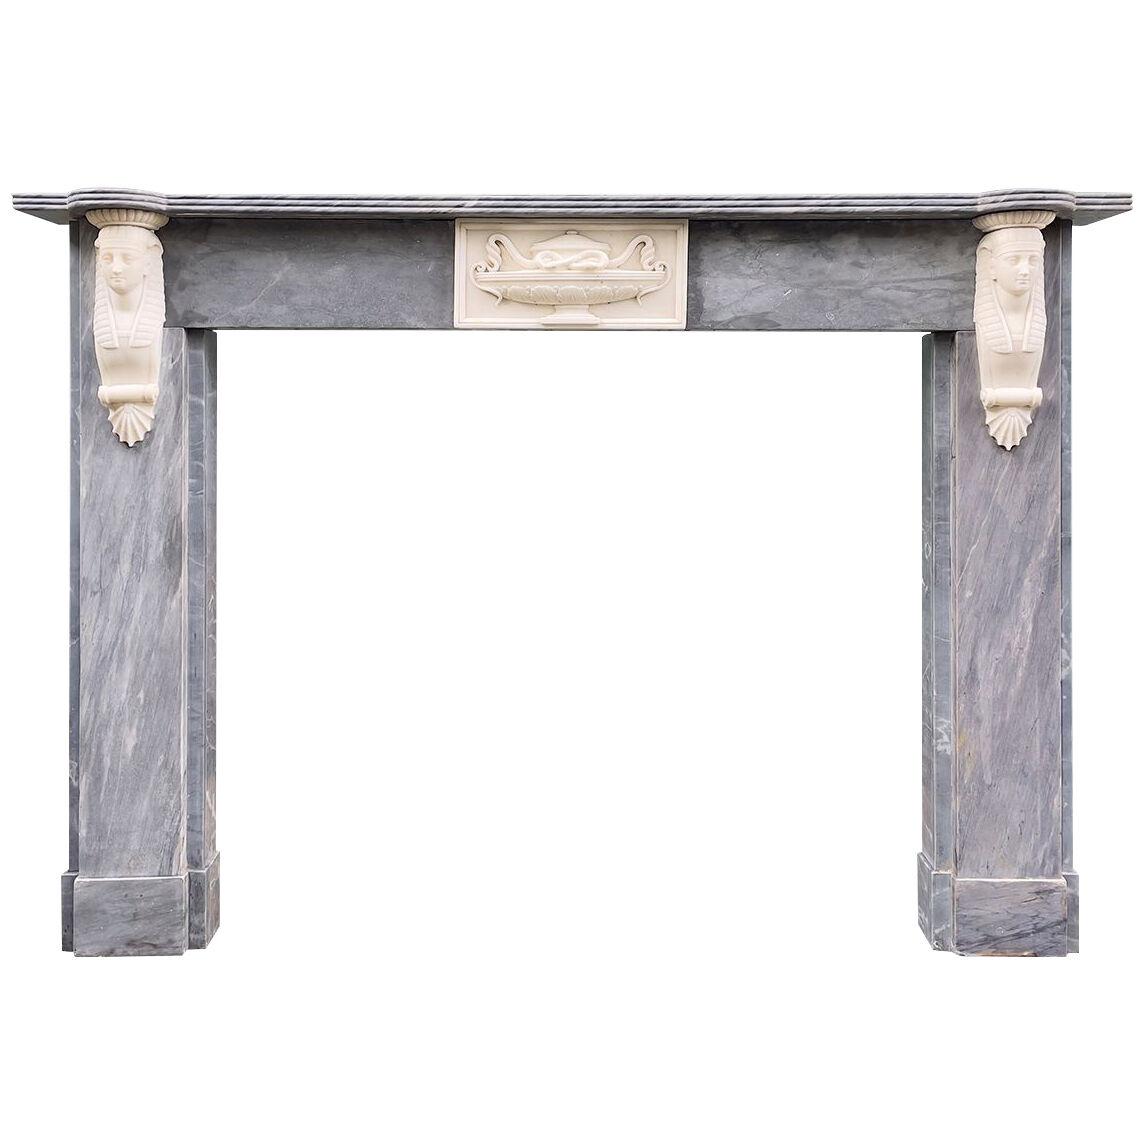 An English Regency Period Egyptian Revival Marble Fireplace Mantel